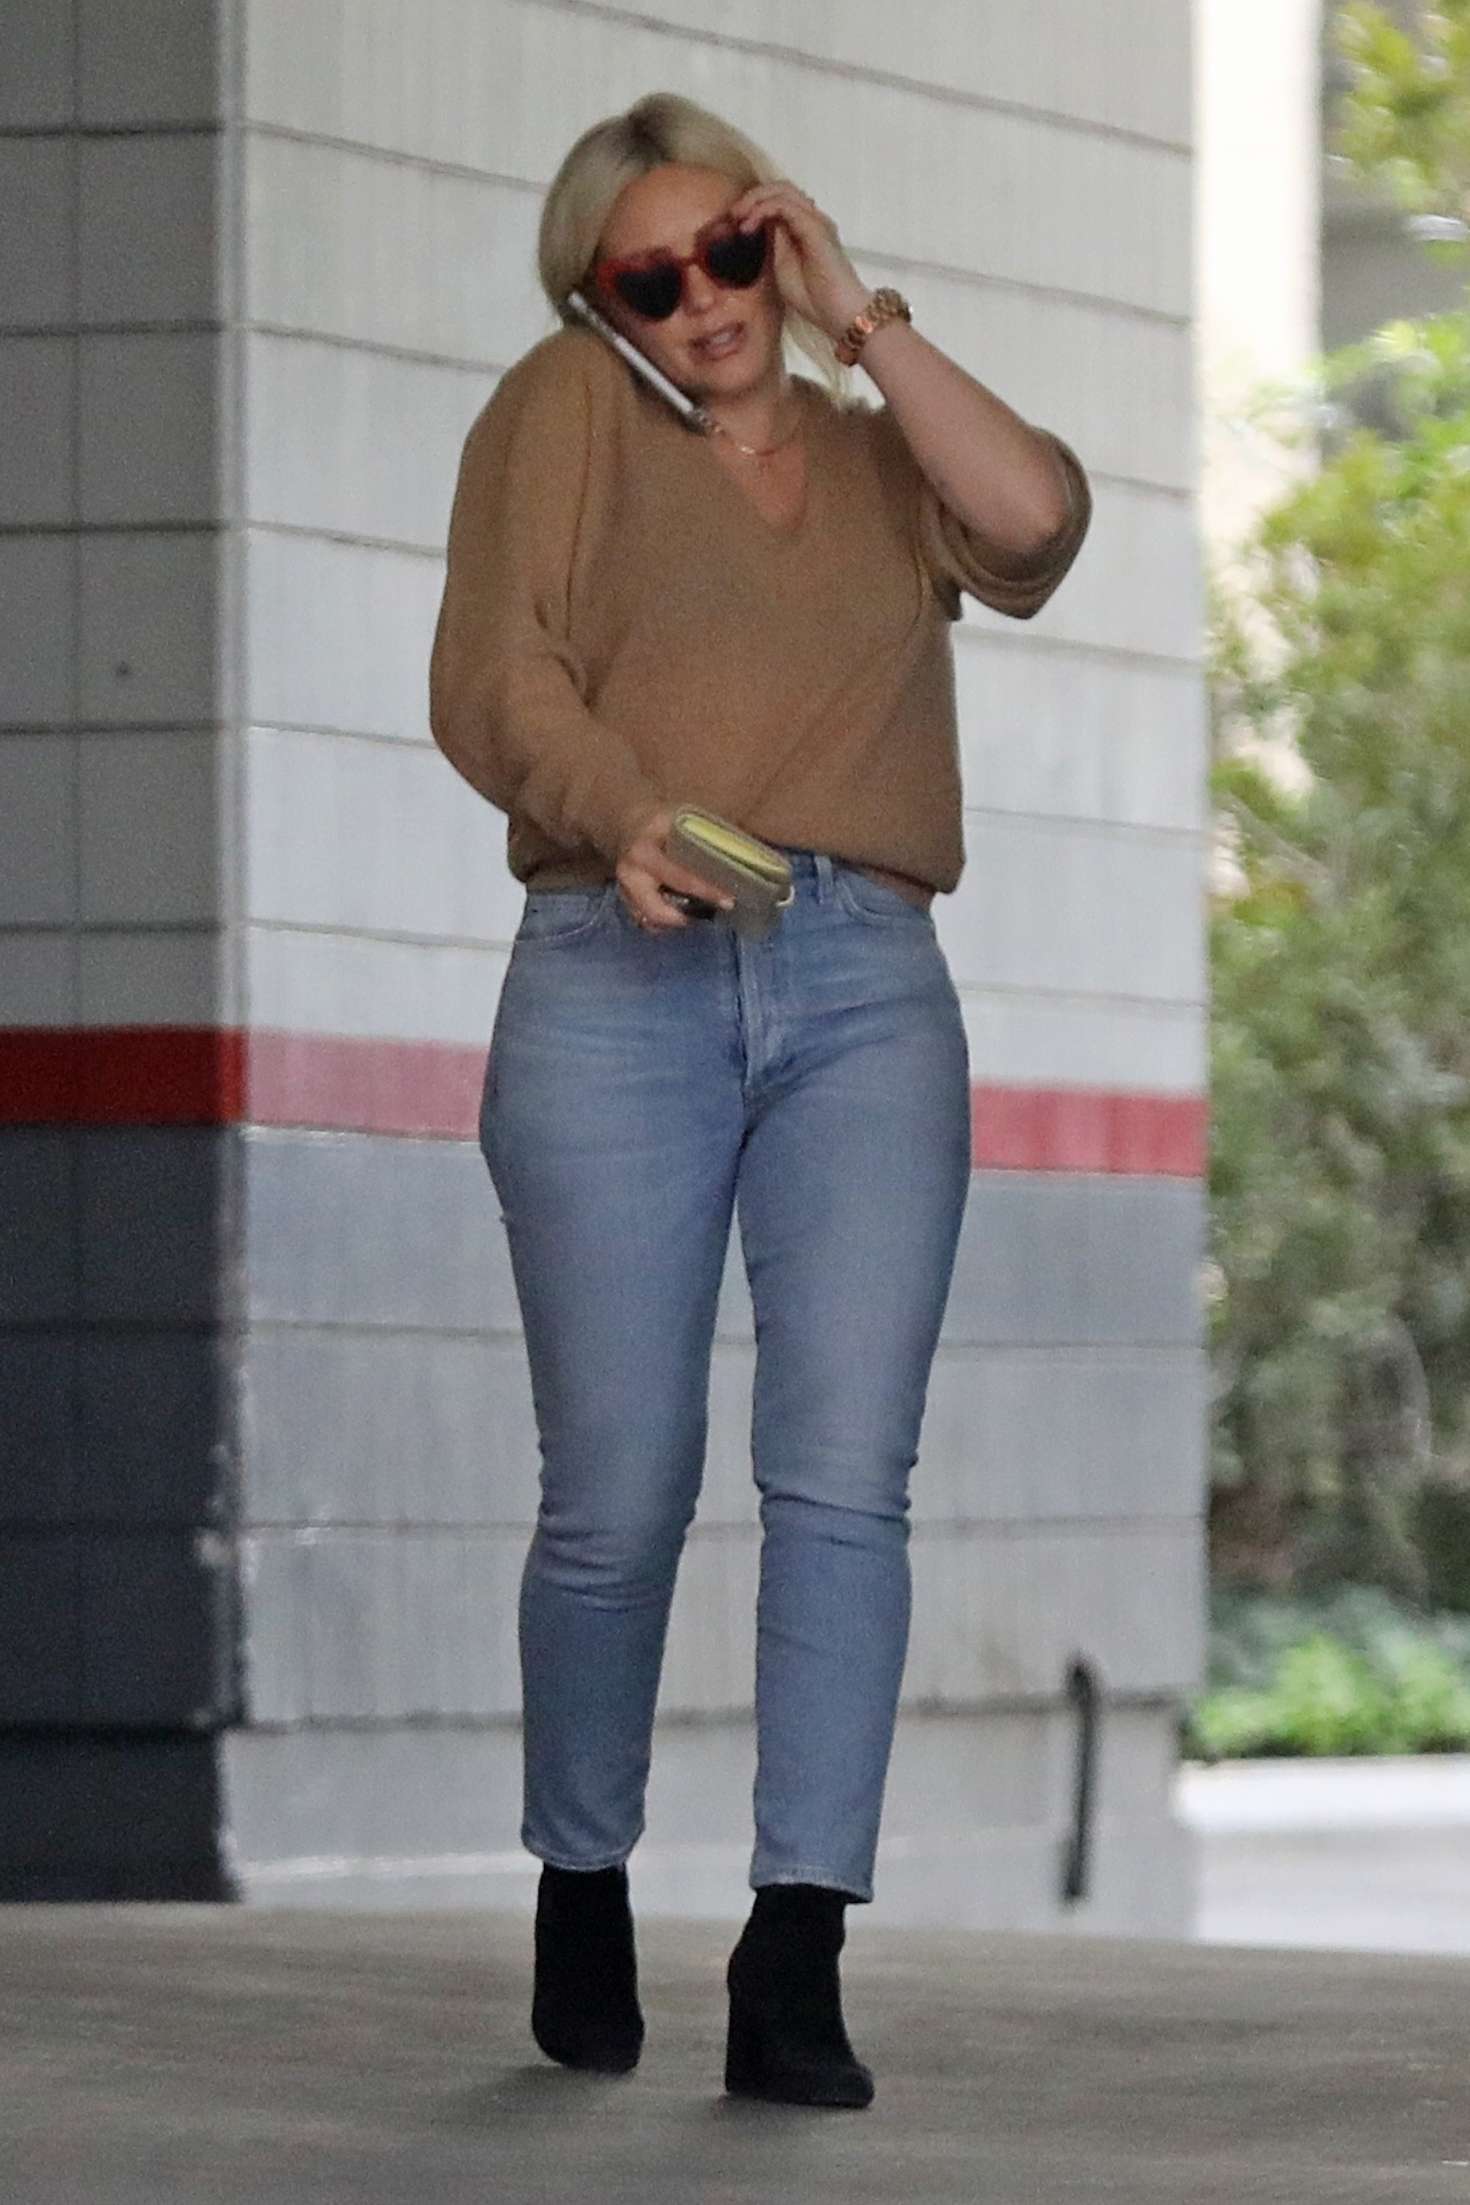 Hilary Duff at a gas station in LA